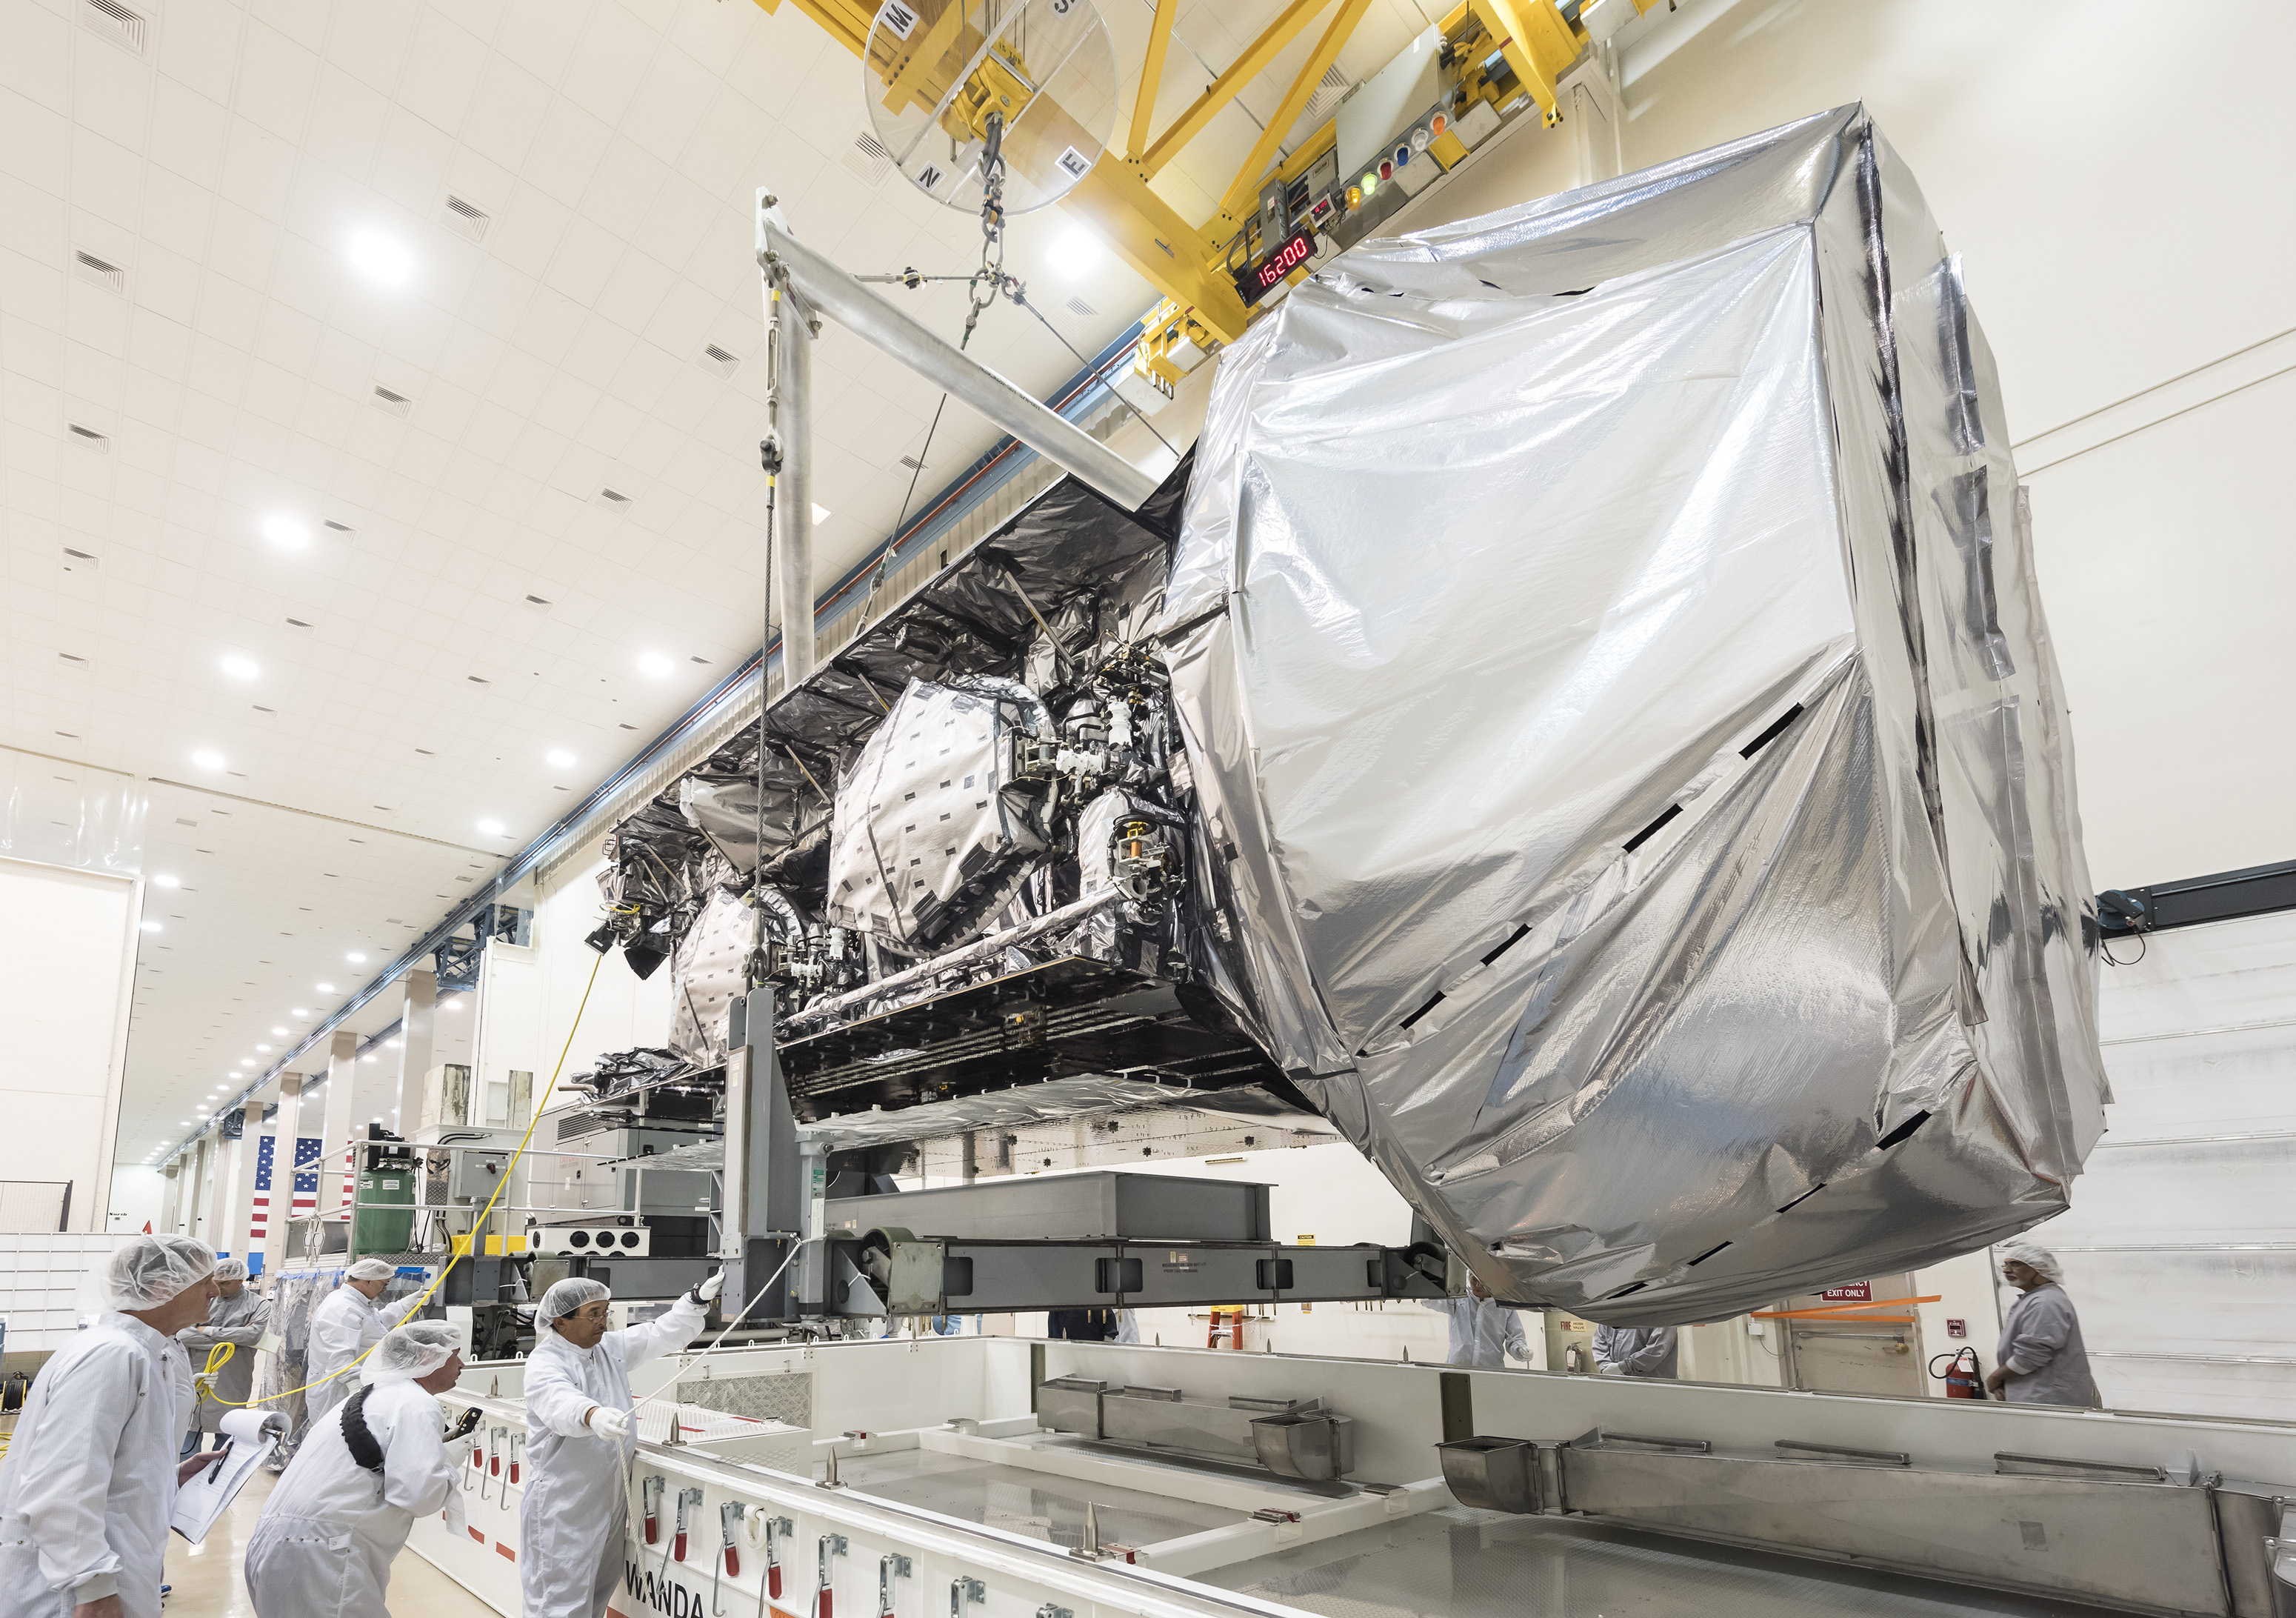 On June 28, MUOS-4, the next satellite scheduled to join the U.S. Navy’s Mobile User Objective System (MUOS) secure communications network, shipped to Cape Canaveral from Lockheed Martin’s satellite manufacturing facility in Sunnyvale, California. Launch is currently scheduled for no earlier than August 27. Photo Credit: Lockheed Martin